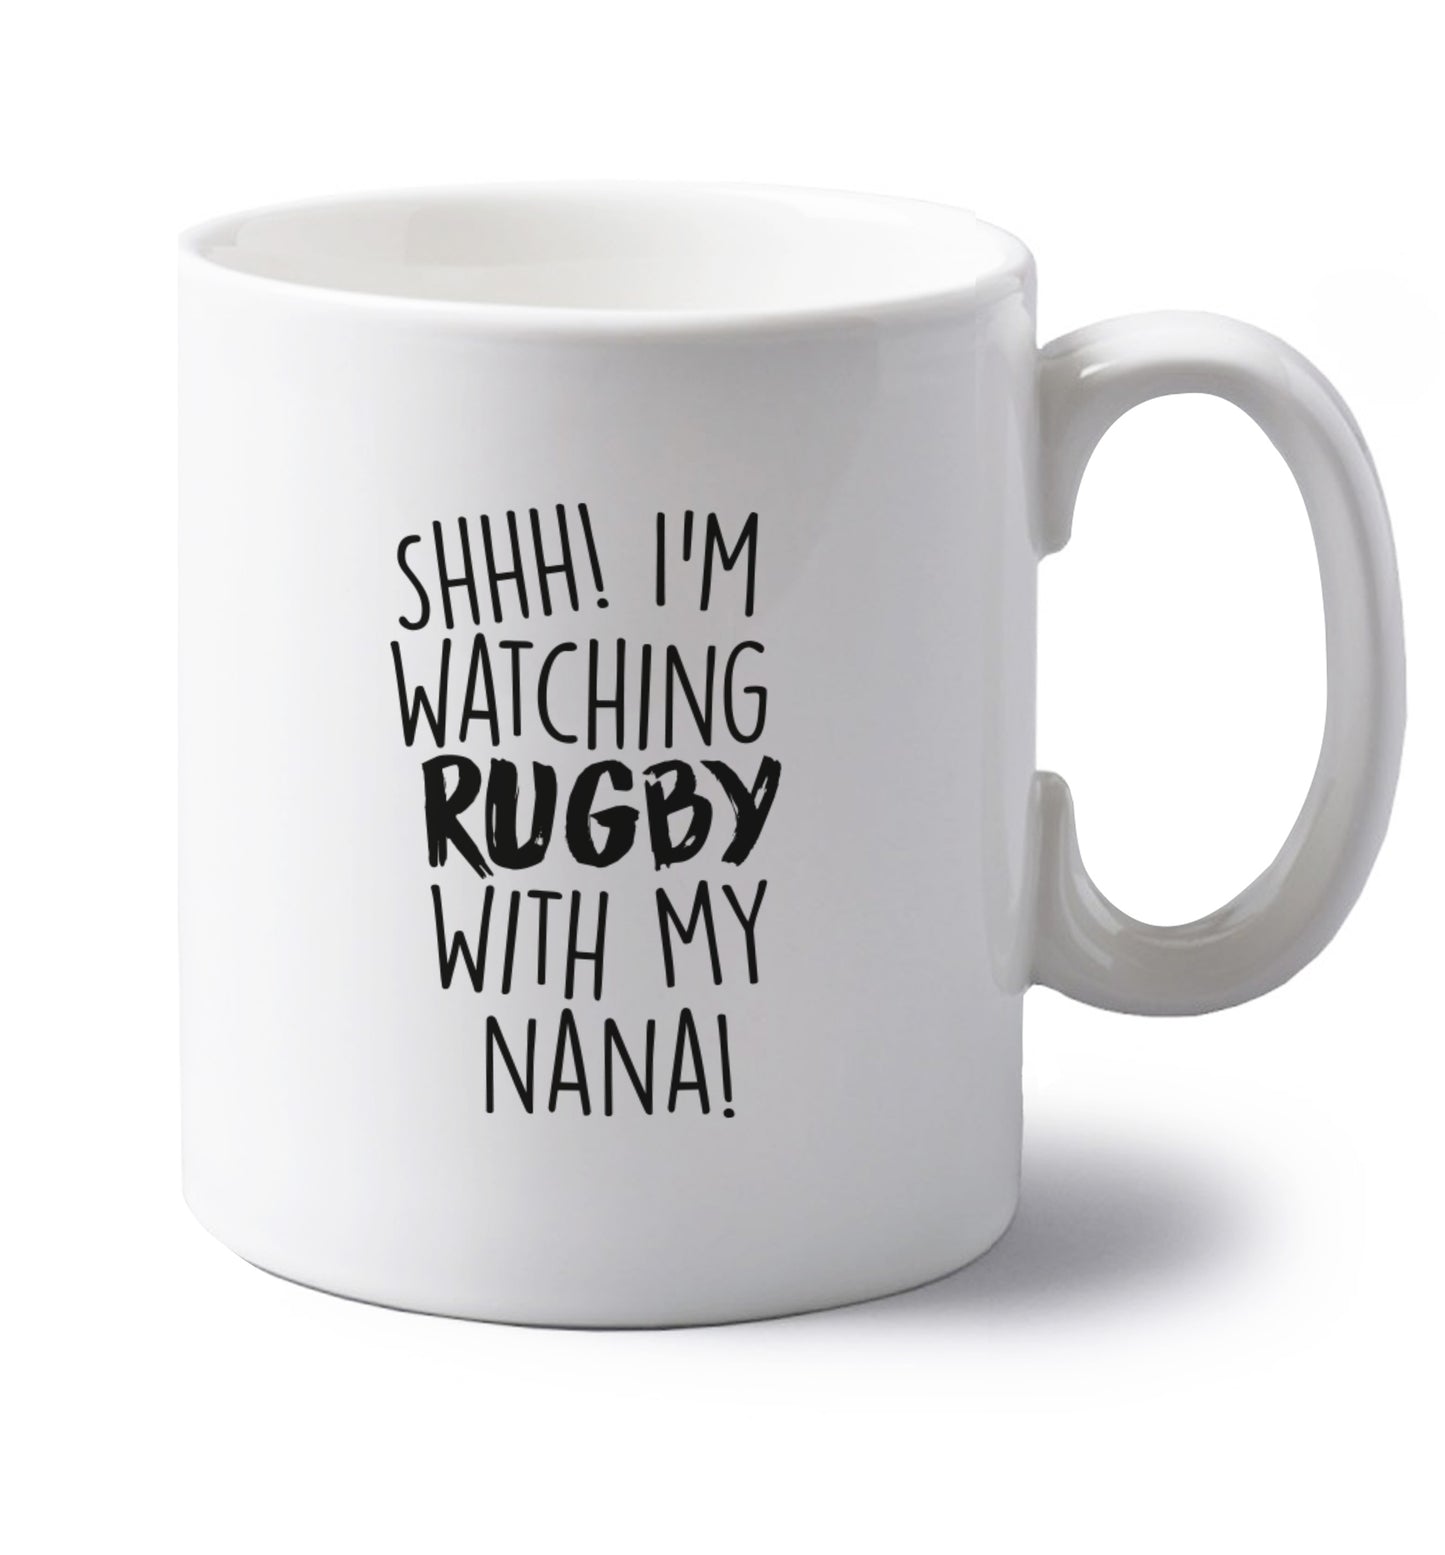 Shh I'm watching rugby with my nana left handed white ceramic mug 